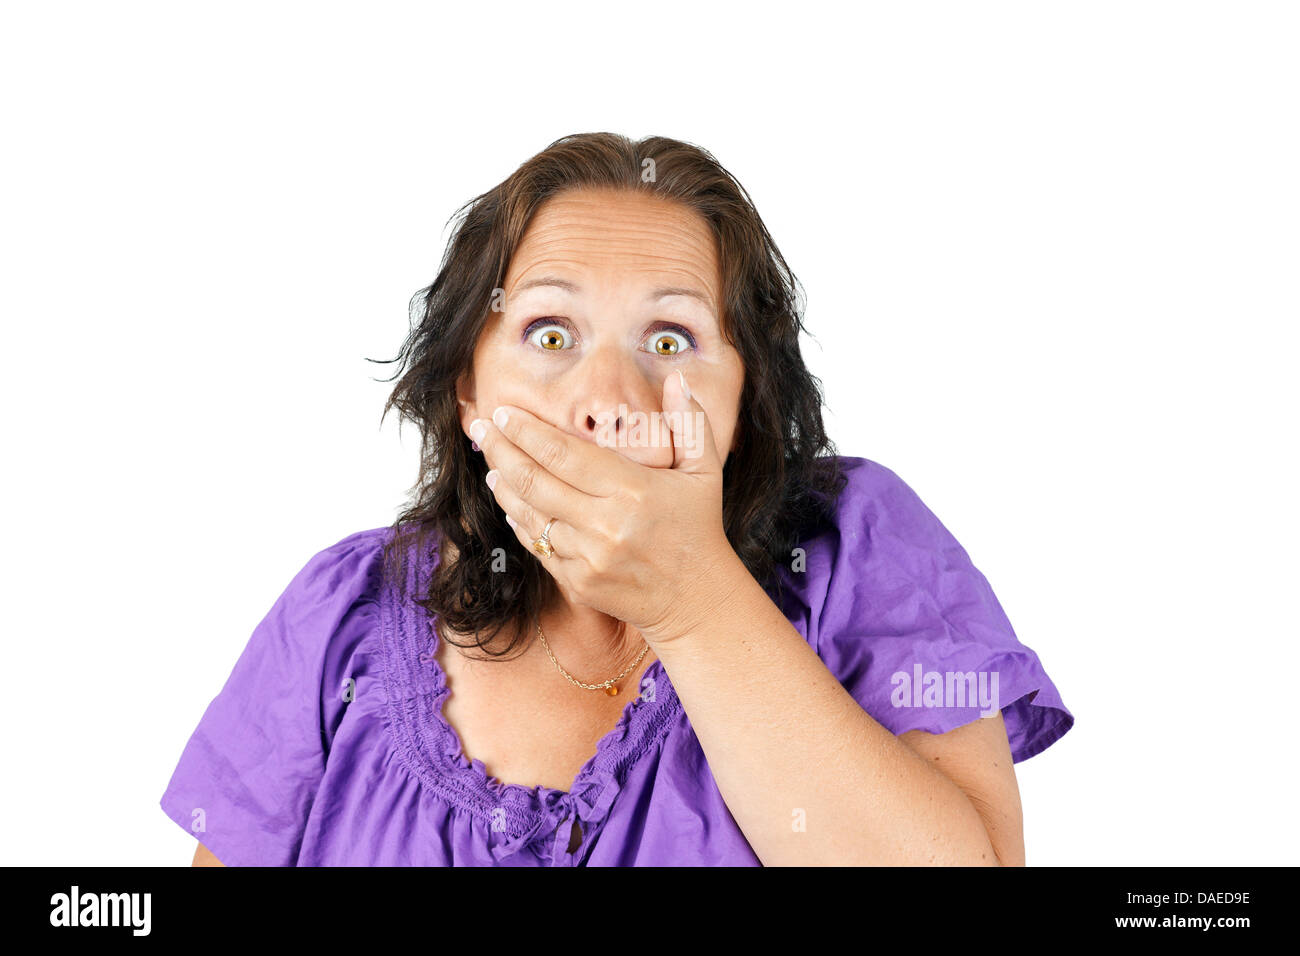 Gobsmacked, shocked or surprised woman with hand over mouth Stock Photo